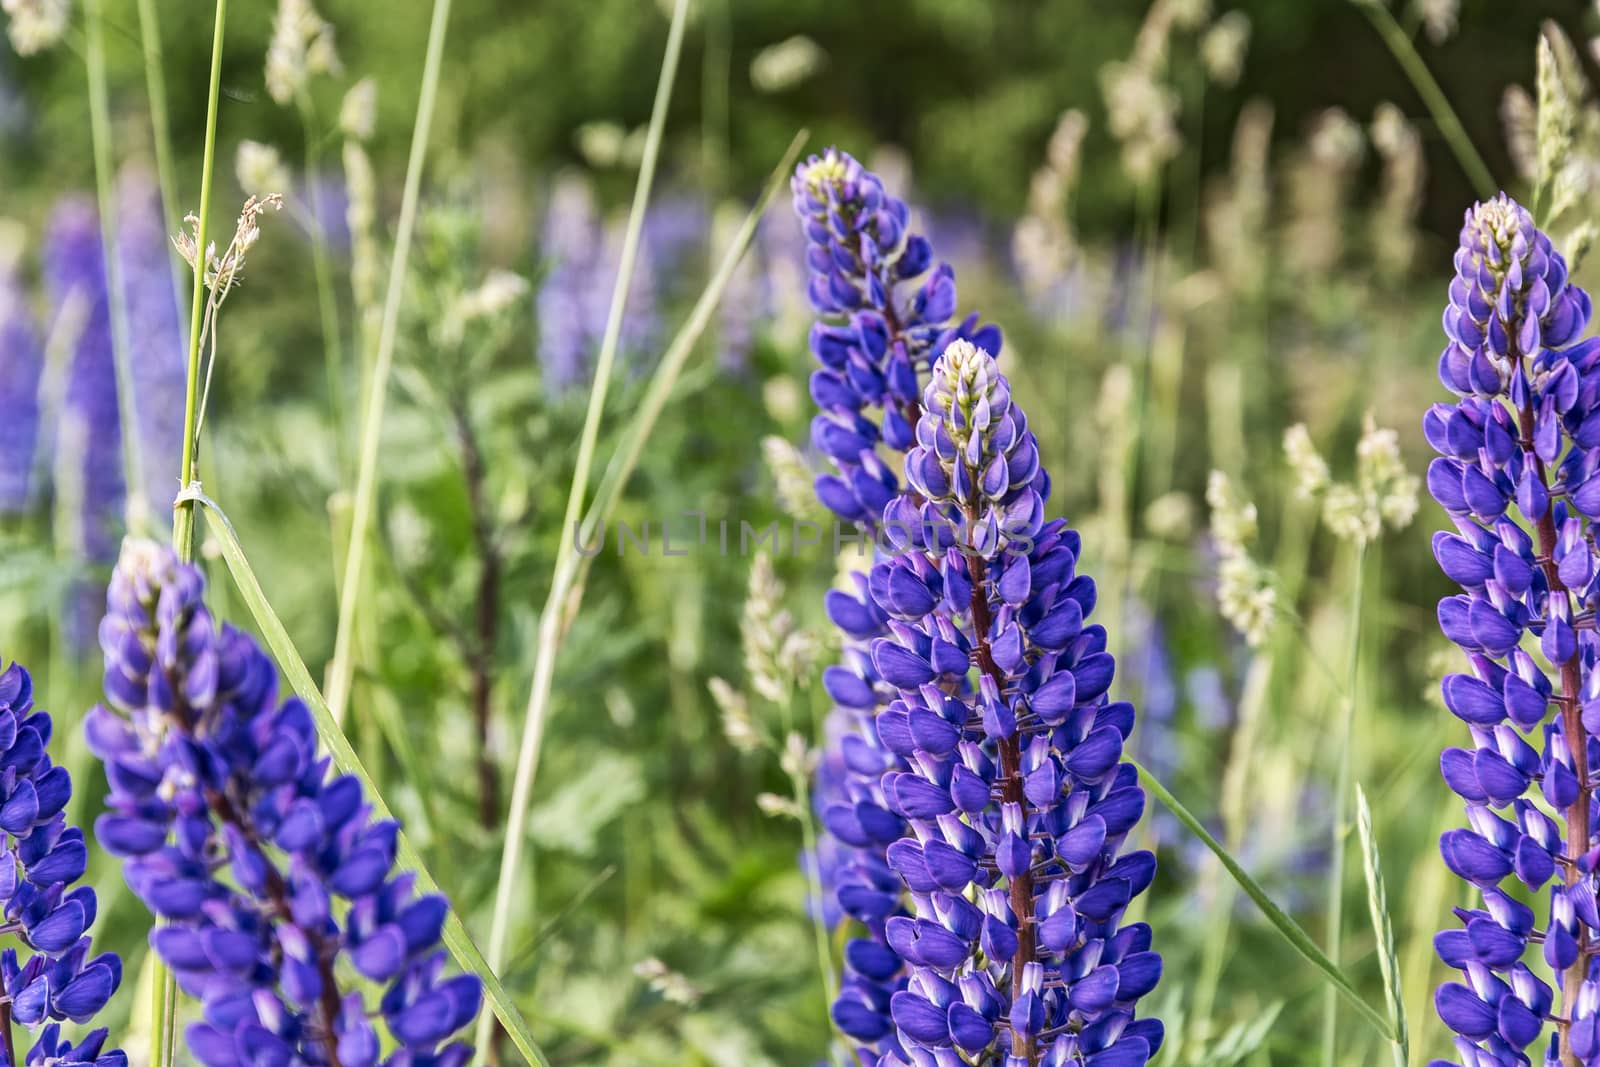 Among the thickets of green grass, blue lupine flowers blossomed